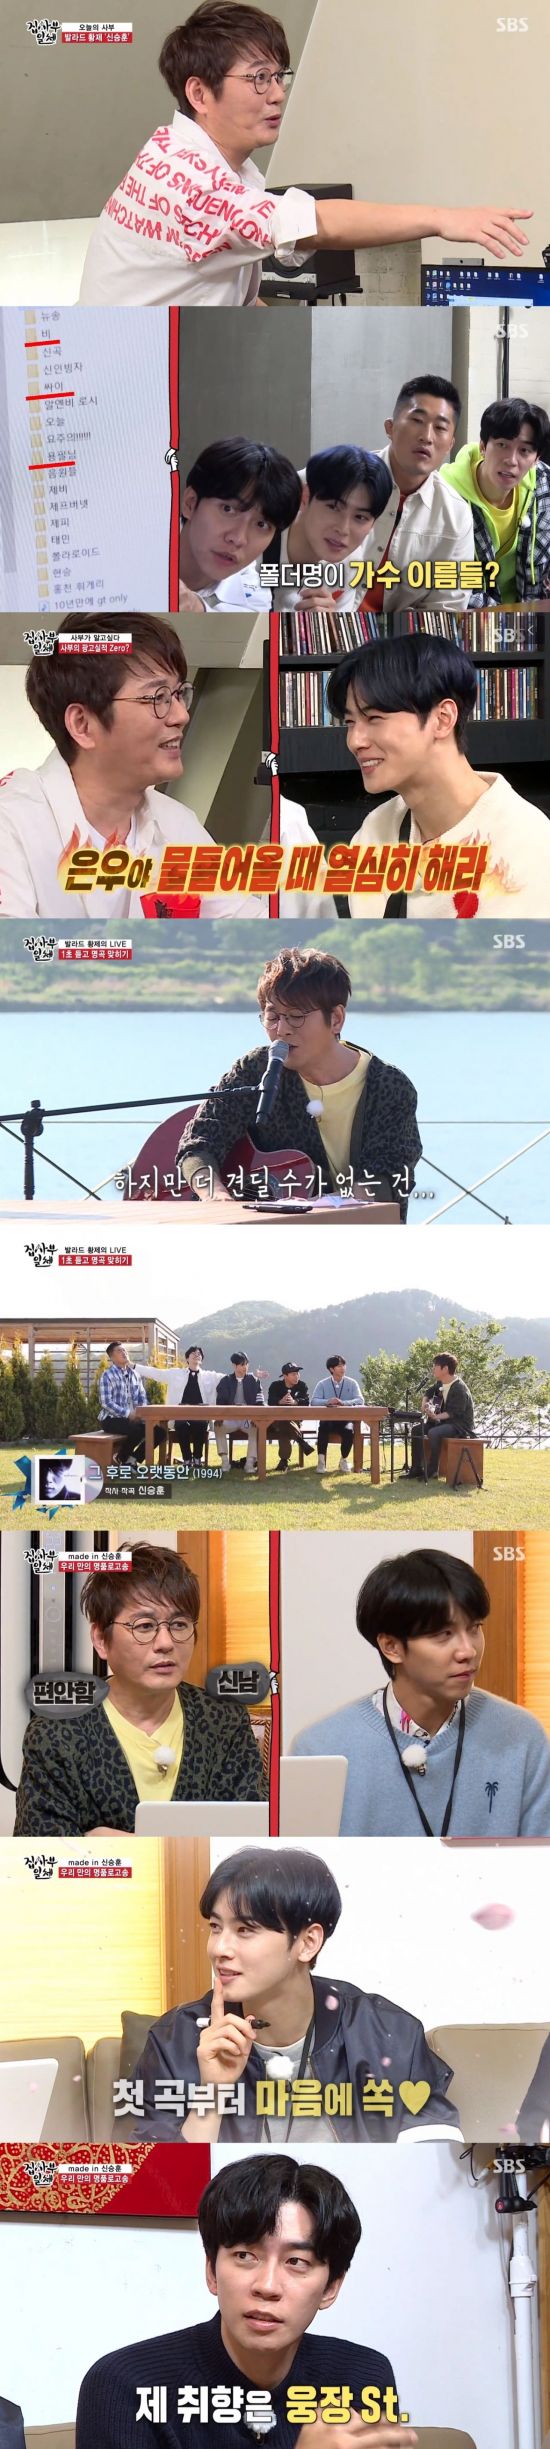 On the afternoon of the 17th, SBS All The Butlers appeared in Shin Seung Huns daily Master and made a logo song with the members.On this day, All The Butlers members went to the practice room to meet Master Shin Seung Hun.Lee Seung-gi speculated that if he is right, he has never been very good at entertainment.Finally, the members who met Shin Seung Hun, the daily master, shook hands and greeted each other.Shin Seung Hun released a song that he made that was not suitable for his song, which he created a folder in the name of a singer.The folder had singers such as Rain and Psy and Jeff Bridges Burnett.Jeff Bridges Burnett then surprised the members by telling an anecdote that Shin Seung Hun called him Brother.Especially when Shin Seung Hun gave a little unpublished song for Jeff Bridges Burnett, Lee Seung-gi said, I have not signed yet. The members also skipped to ask for each others songs.Lee Seung-gi also mentioned that Shin Seung Hun has not taken any CF so far.Shin Seung Hun said, At the time, I did not take it because the CF atmosphere and my sadness music did not fit. He replied frankly, I do not do it because I do not do it, and now I regret it very much.Its Jung Eun-woo, do it hard when you come in, he then left a heartfelt tip to Cha Eun-woo.All The Butlers members headed to the Azit Pensions of Shin Seung Hun.There, Shin Seung Hun played a game to catch the title when he sang a song.All of the members were enthusiastic, but Shin Sung-rok proved to be a steam fan of Shin Seung Hun every time he showed his outstanding ability.Shin Seung Hun also created the All The Butlers logo song.When Cha Eun-woo said, Should not you set a genre? Shin Seung Hun advised, The most important thing in writing a song is keywords.The members then made Shin Seung Huns shoulders heavy with orders such as comfortable and exciting: addictive and impactive.However, when Lee Seung-gi showed off his improvisation by putting together the opinions of the members, Lee admired it as okay and Cha Eun-woo liked it as clean.And when the melodies were poured freely into the grand style and rock style of the following members orders, Shin Sung-rok asked Shin Seung Hun to make four songs separately quarterly.SBS entertainment program All The Butlers is broadcast every Sunday at 6:25 pm.